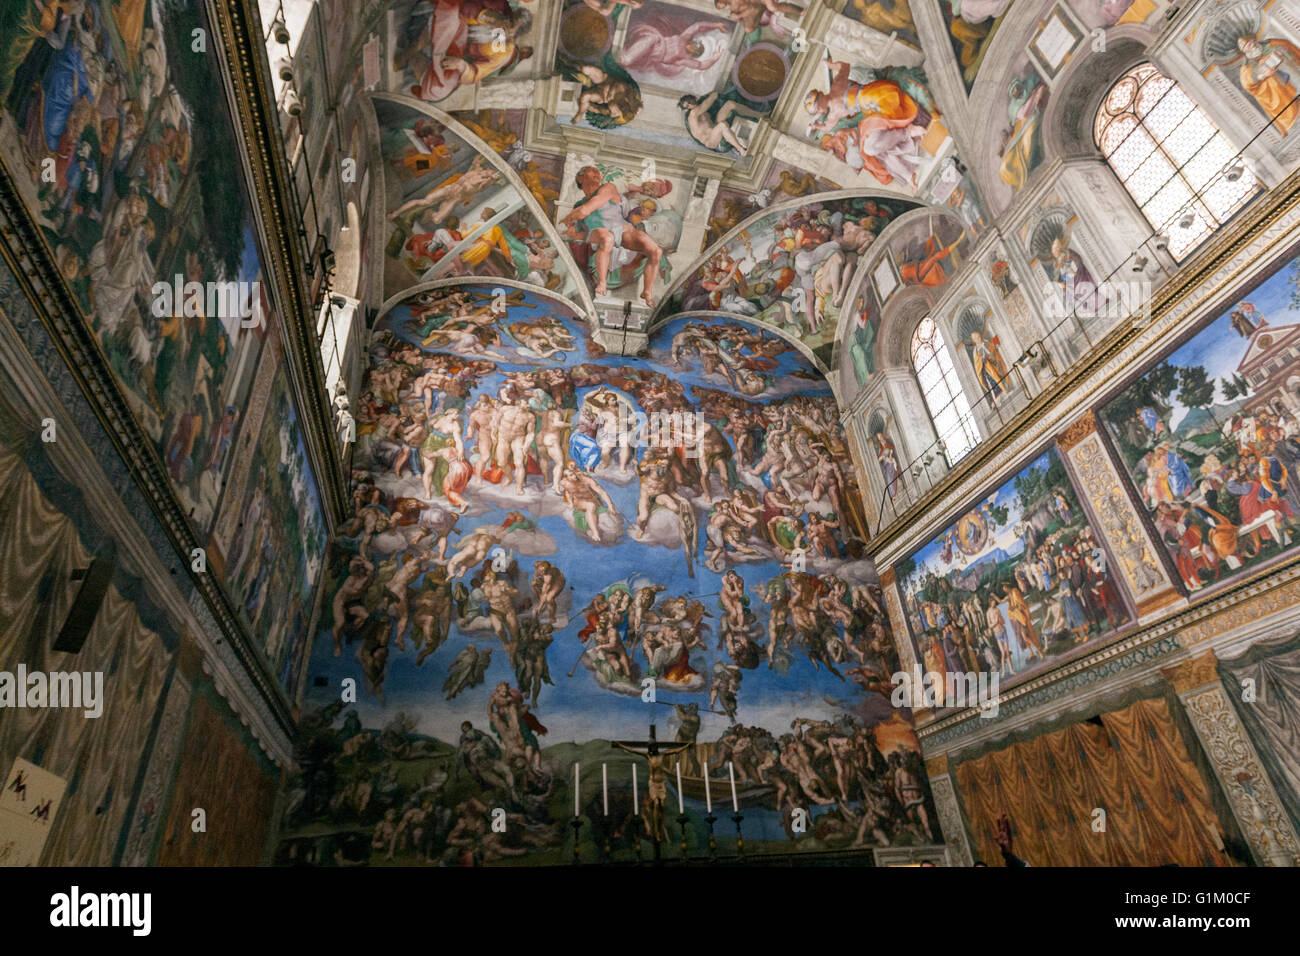 The Sistine Chapel Ceiling Painted By Michelangelo The Last